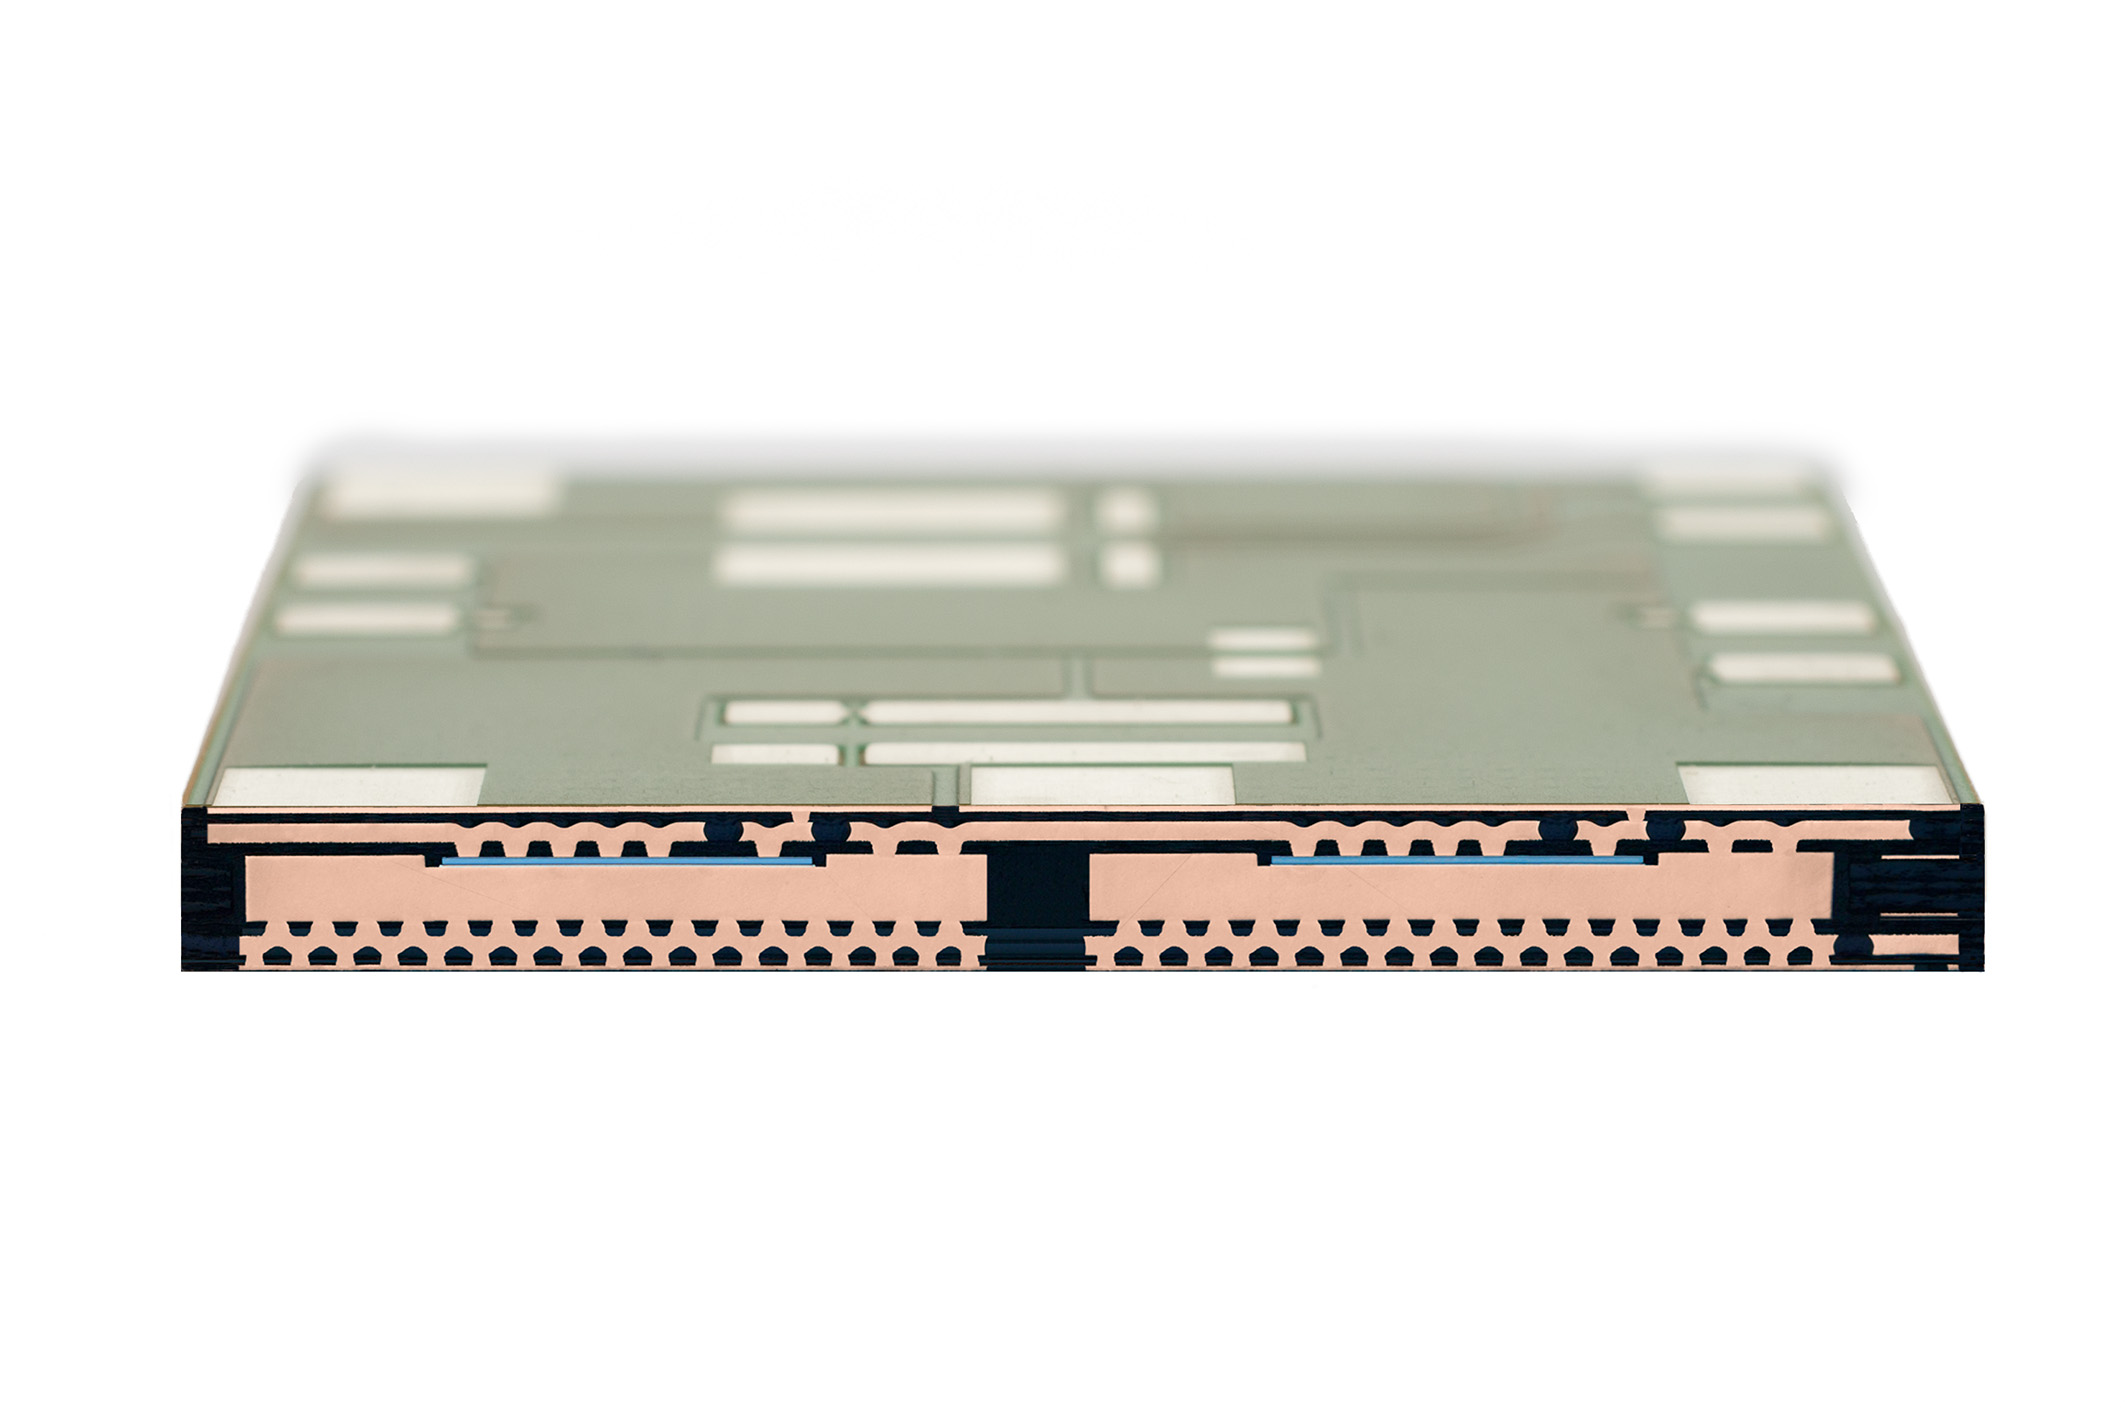 Infineon and SCHWEIZER will showcase the 1200 V CoolSiC chip embedding technology at PCIM Europe 2023 in Nuremberg, at the Infineon booth 412 in Hall 7